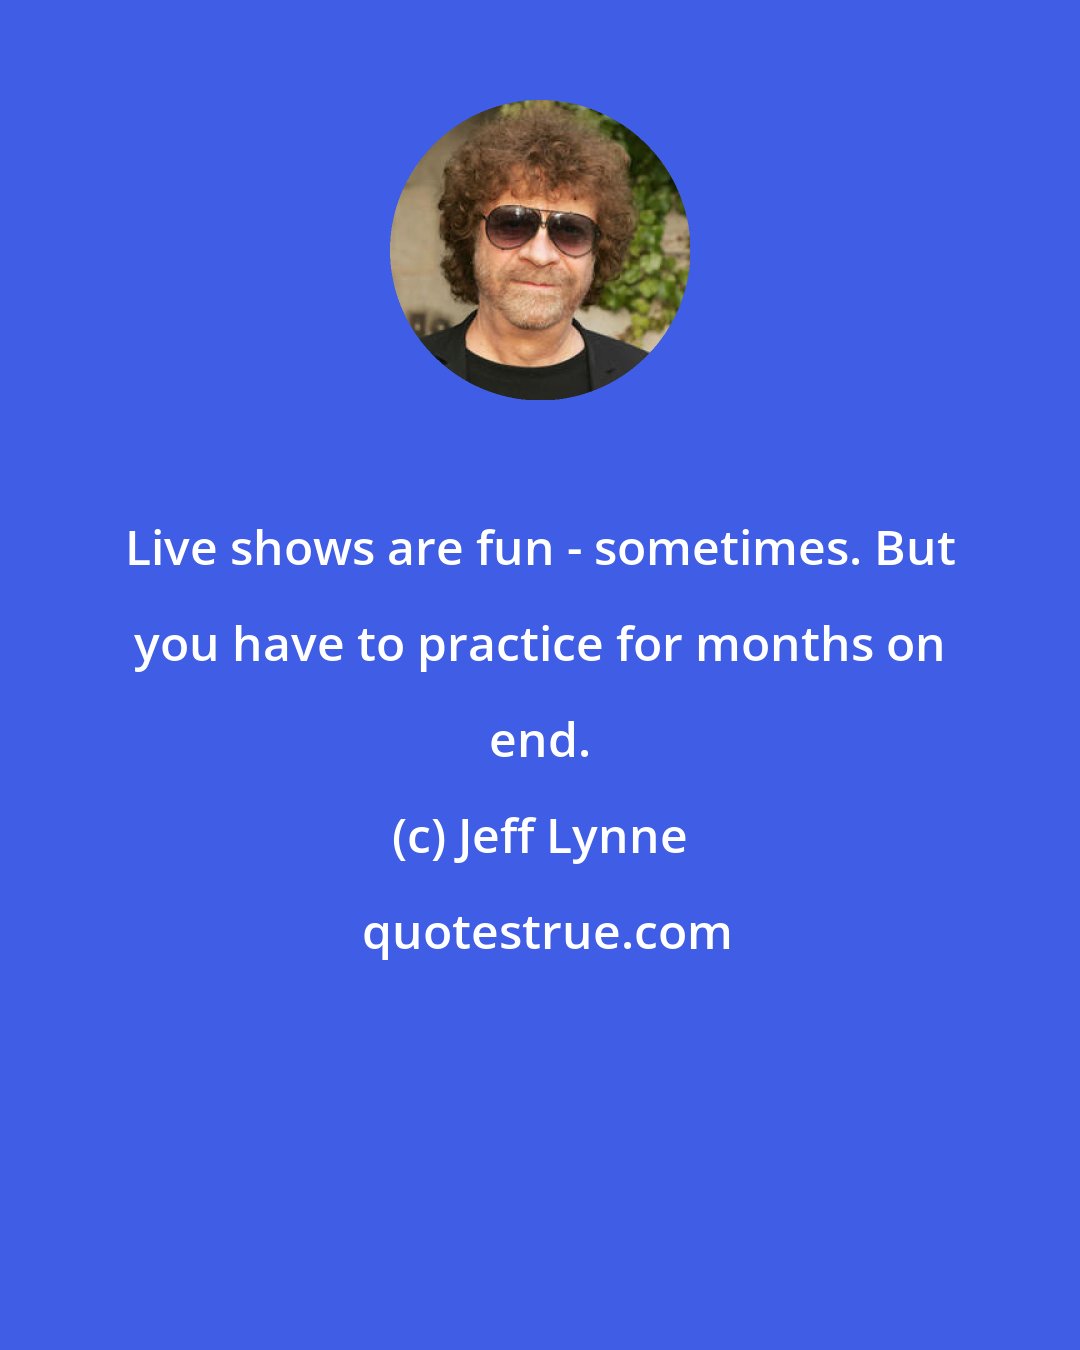 Jeff Lynne: Live shows are fun - sometimes. But you have to practice for months on end.